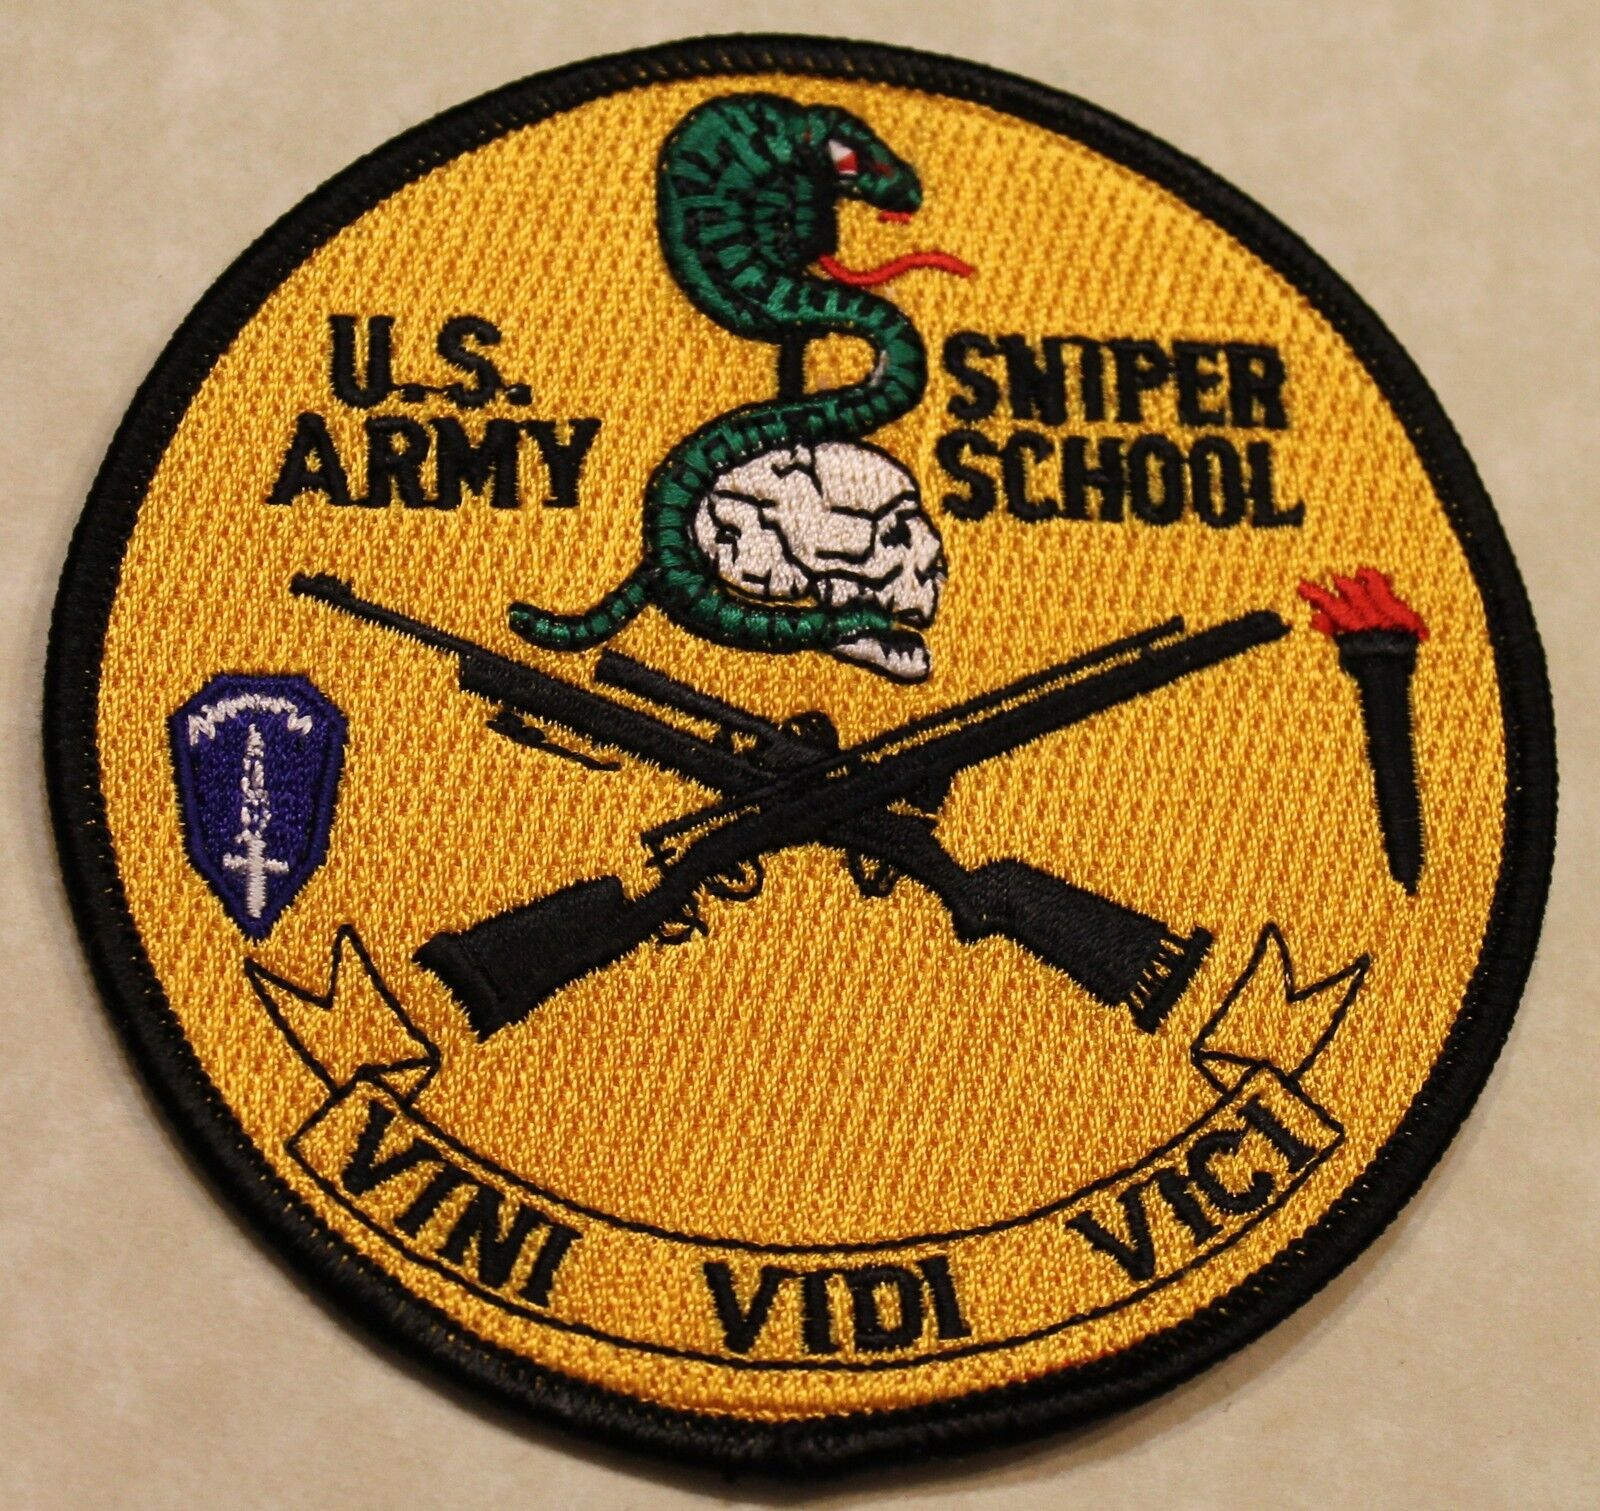 United States Army Sniper School 1989 Patch,  The Authentic Original